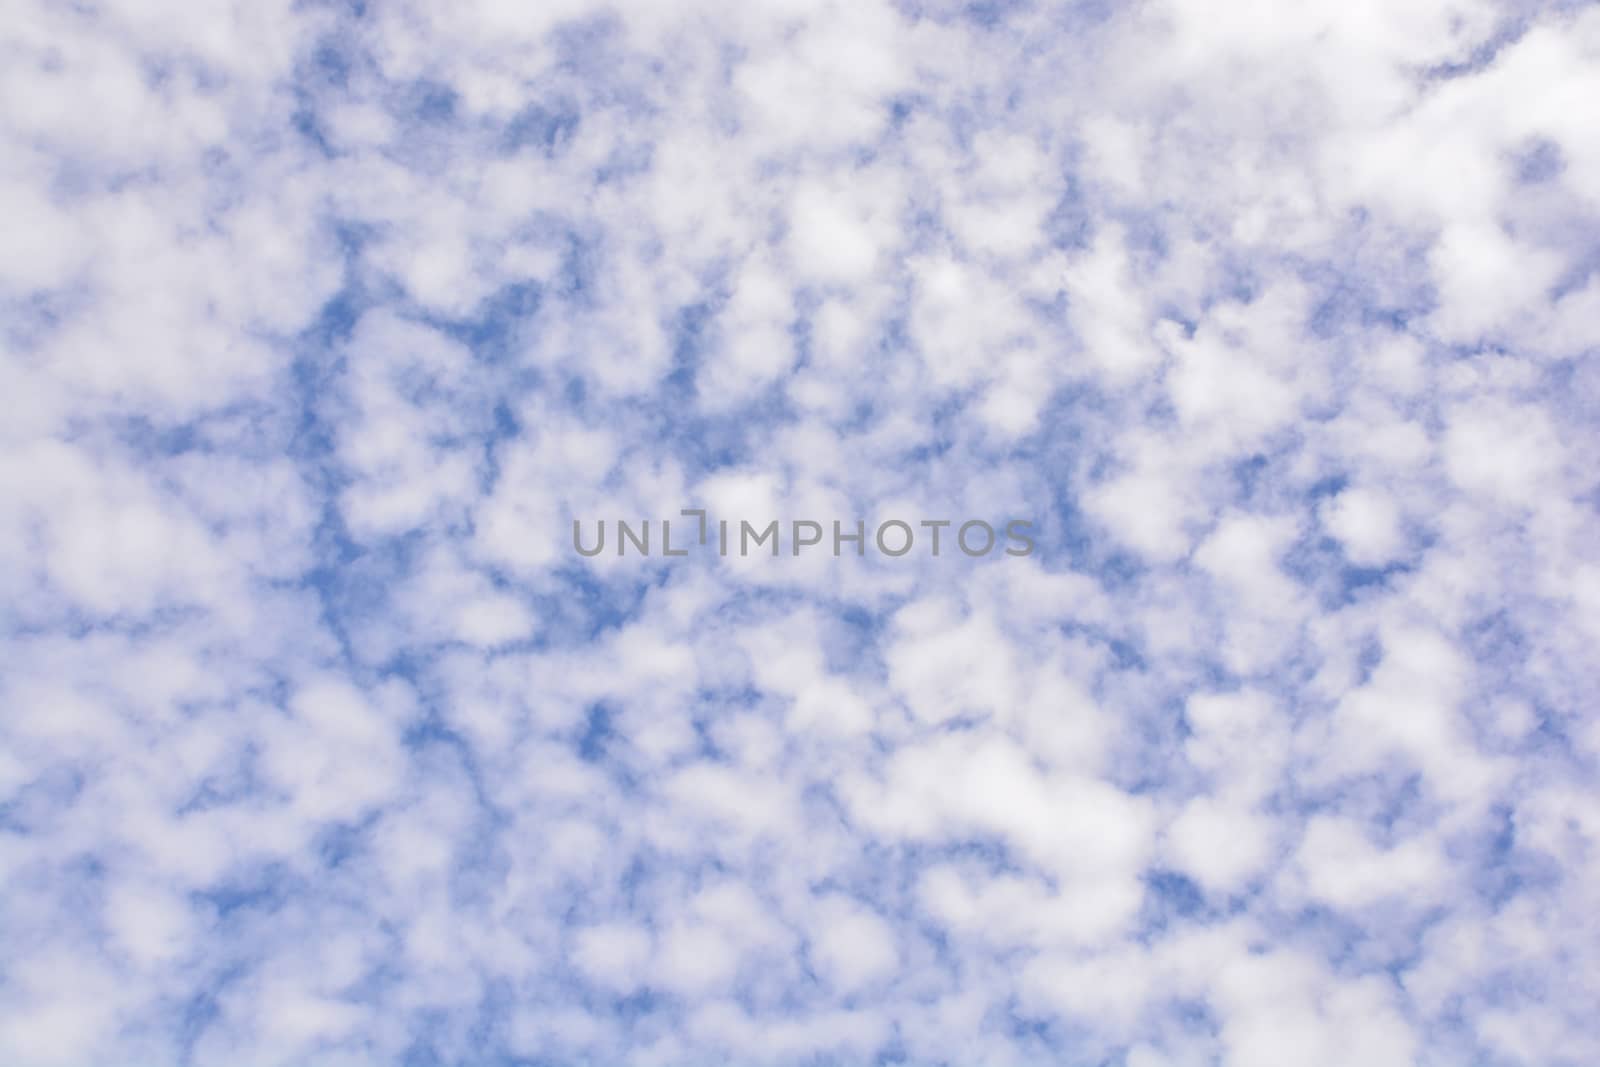 Clouds in the blue sky by ideation90